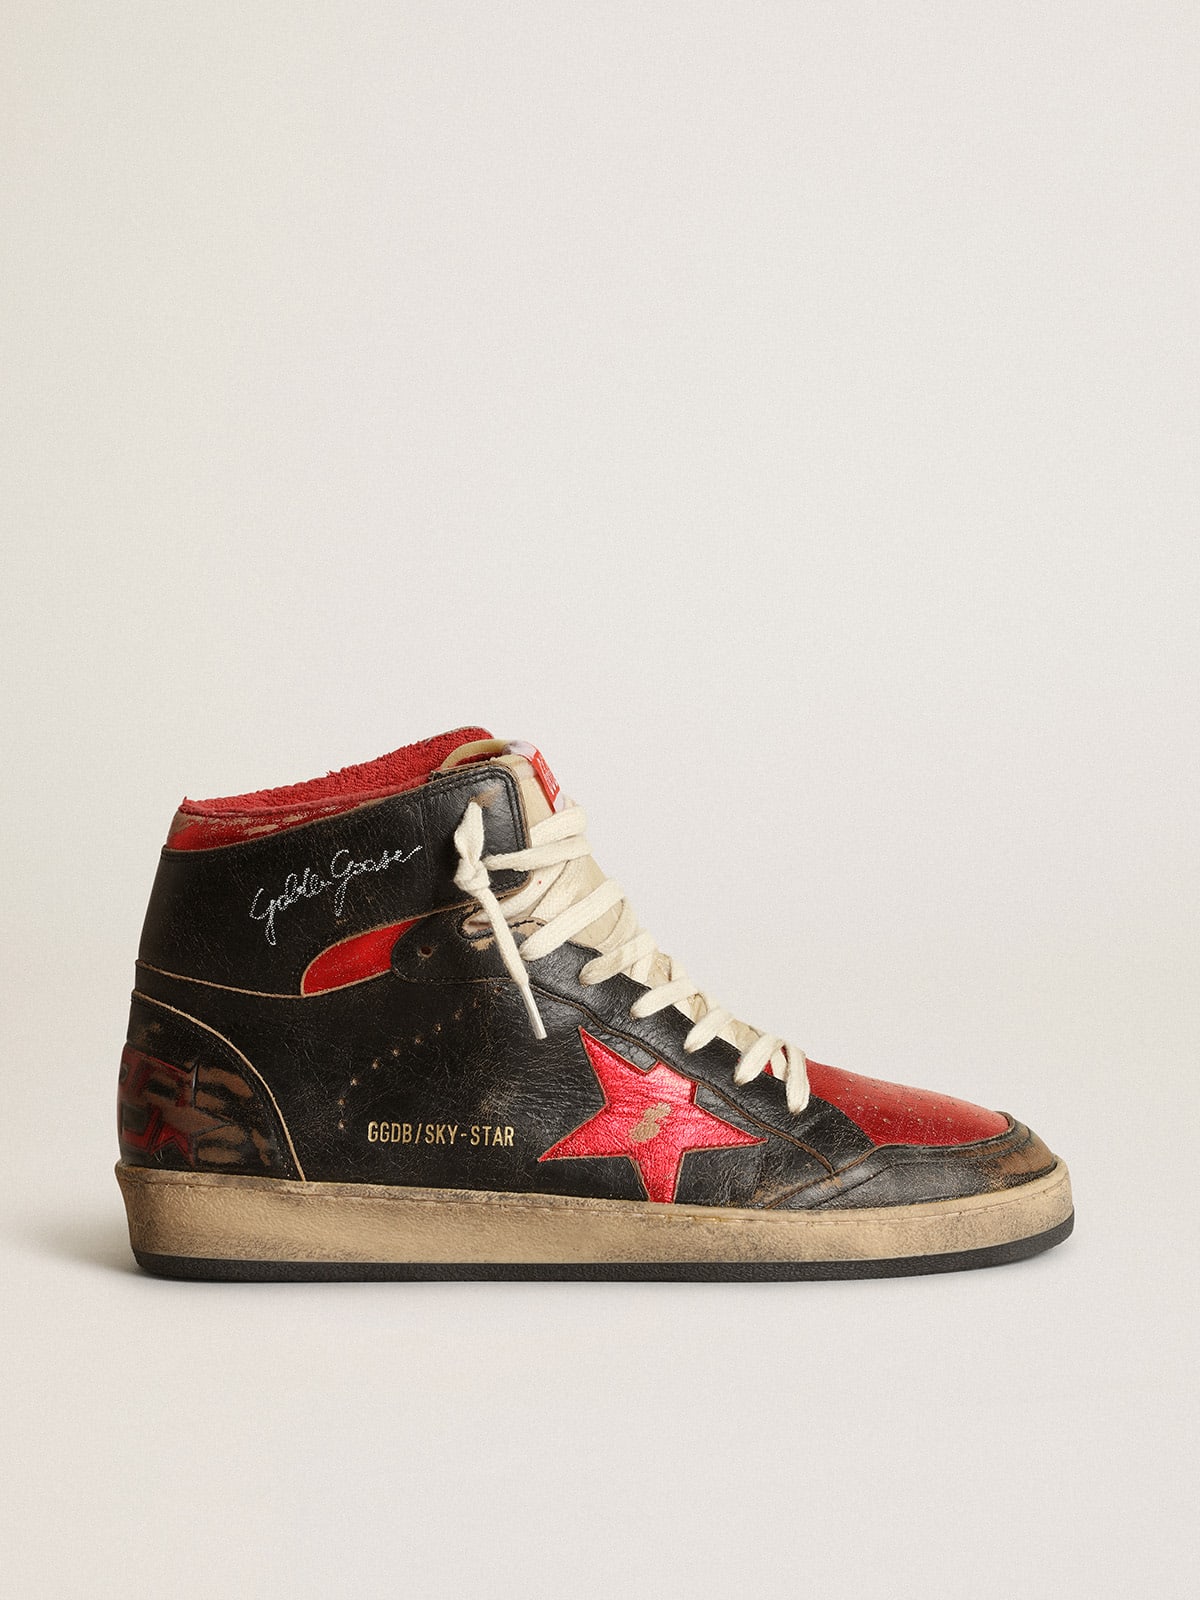 Sky-Star Men's sneakers in glossy black leather with red metallic leather star